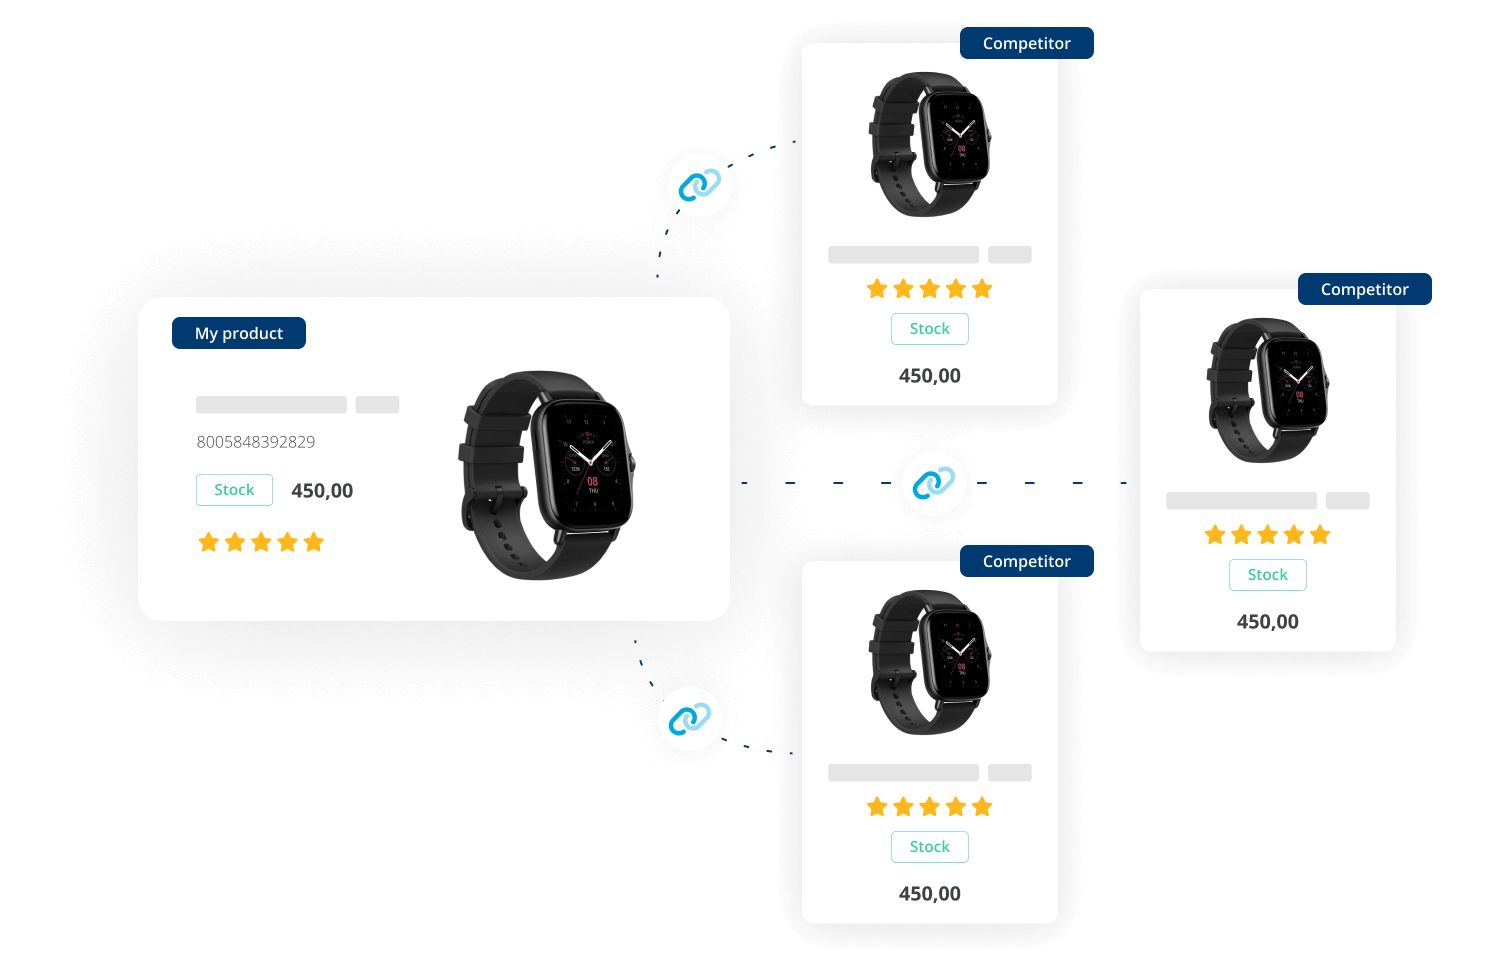 Competitor product matching via SKU EAN or custom